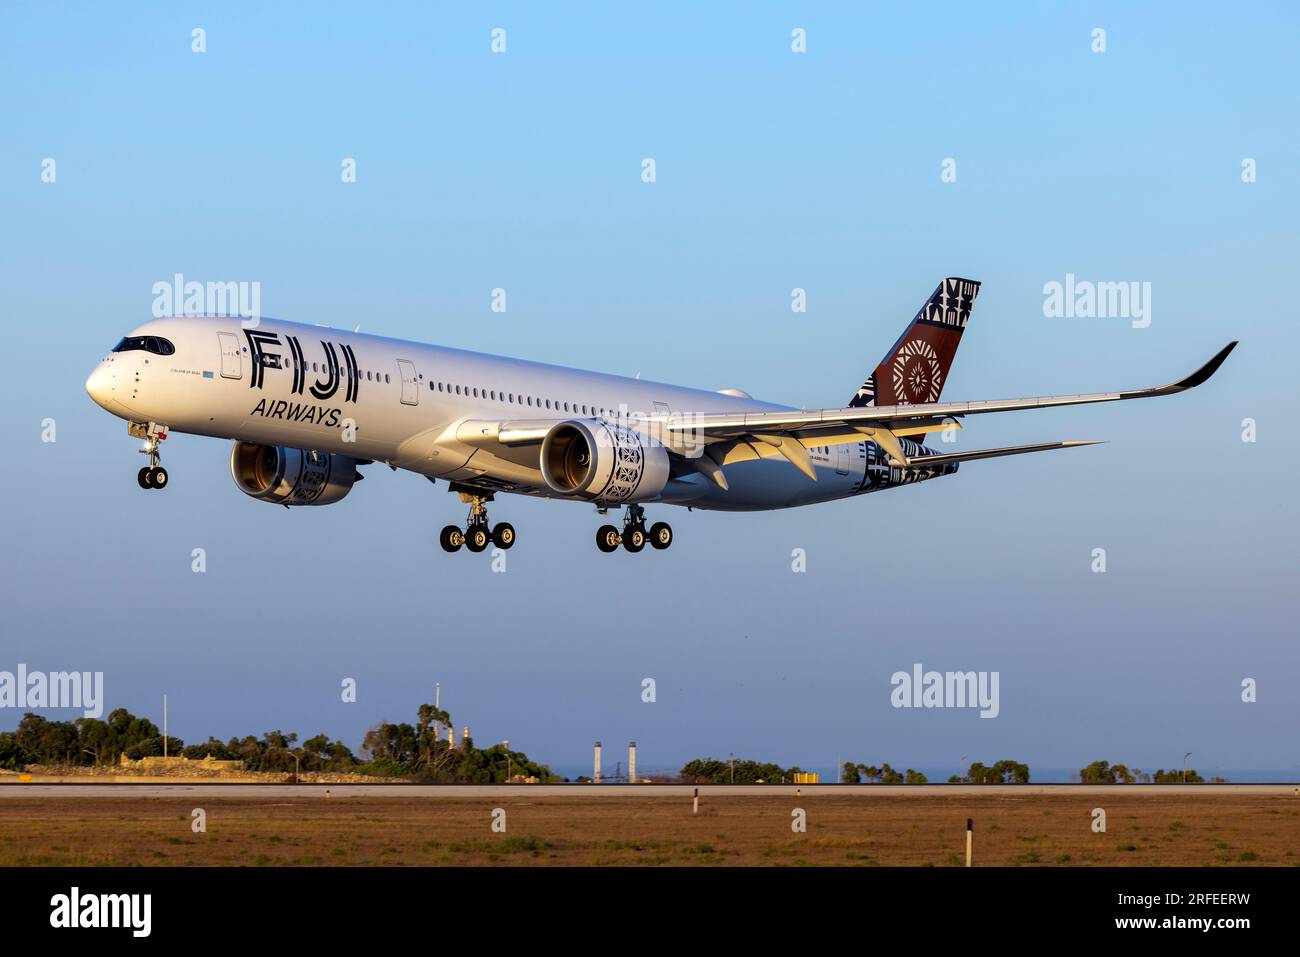 Fiji Airways Airbus A350-941ACJ (REG: F-WJKN) landing after a 2 hour test flight. To be registered DQ-FAM when in service with Fiji Airways. Stock Photo